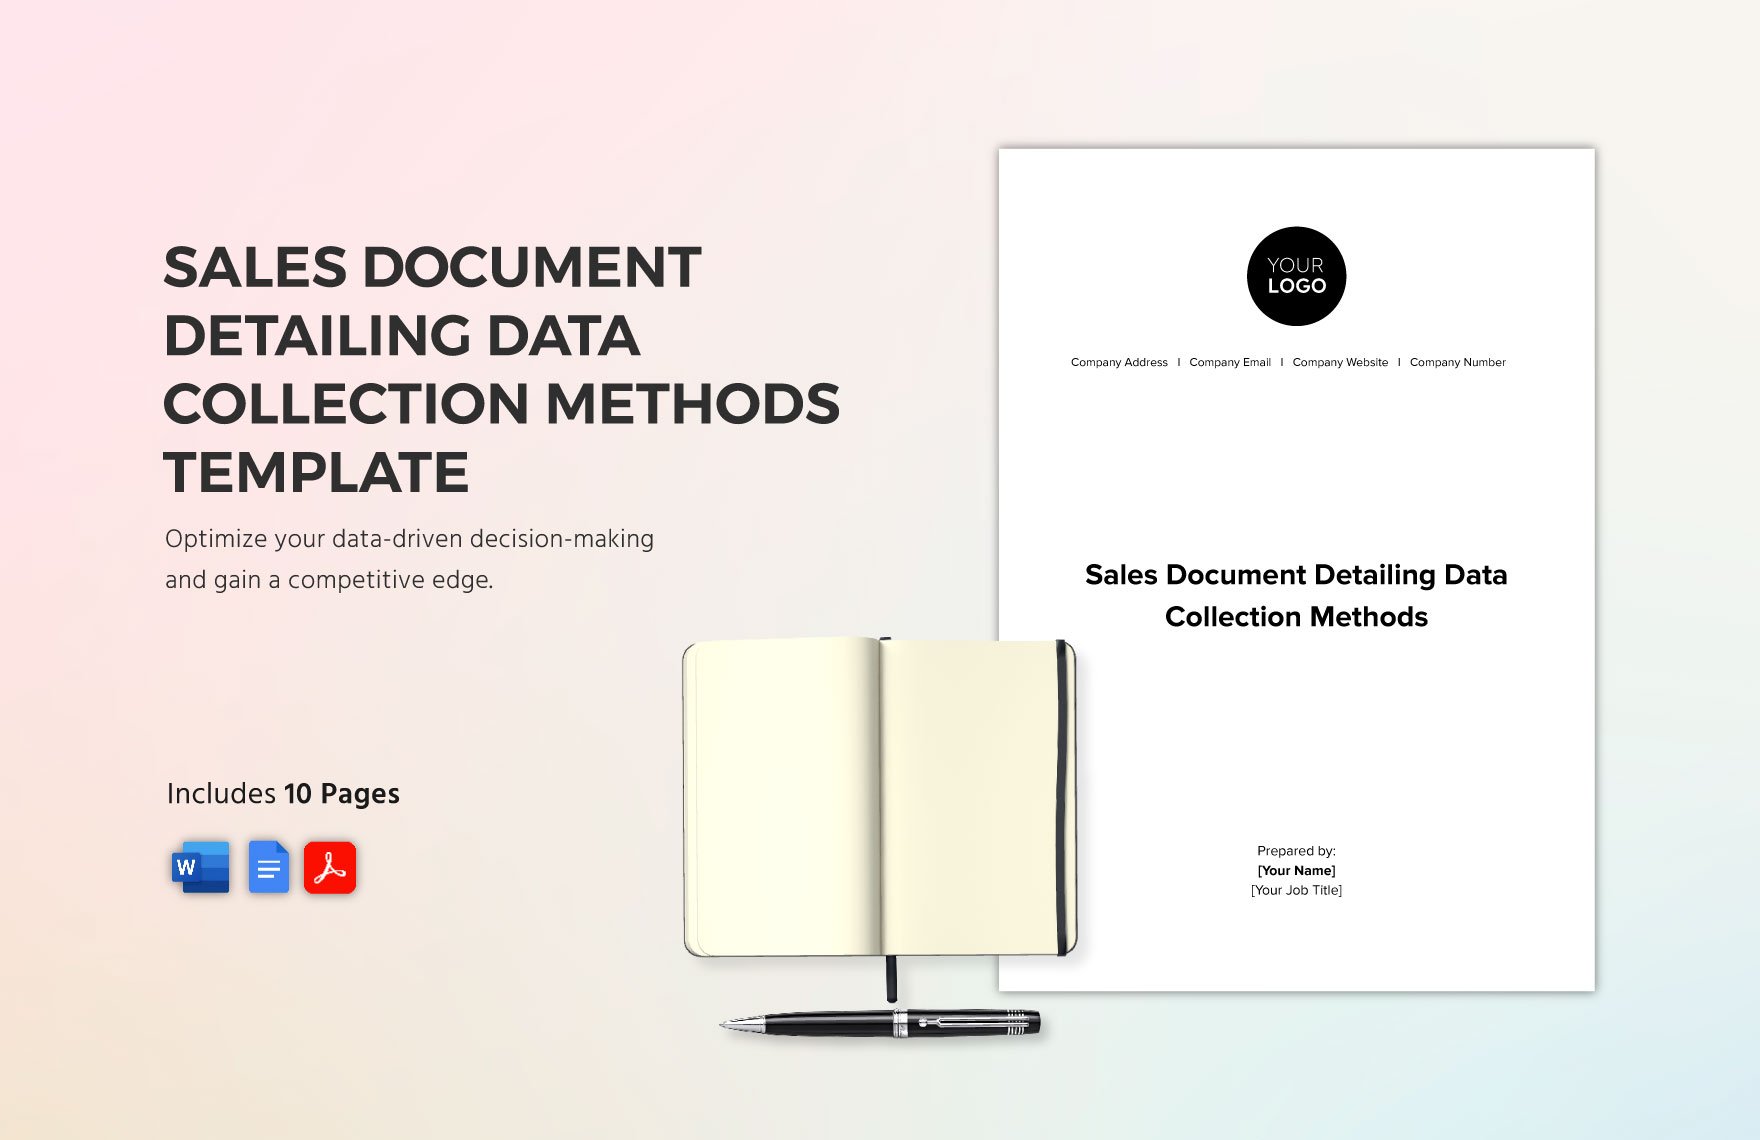 Sales Document Detailing Data Collection Methods Template